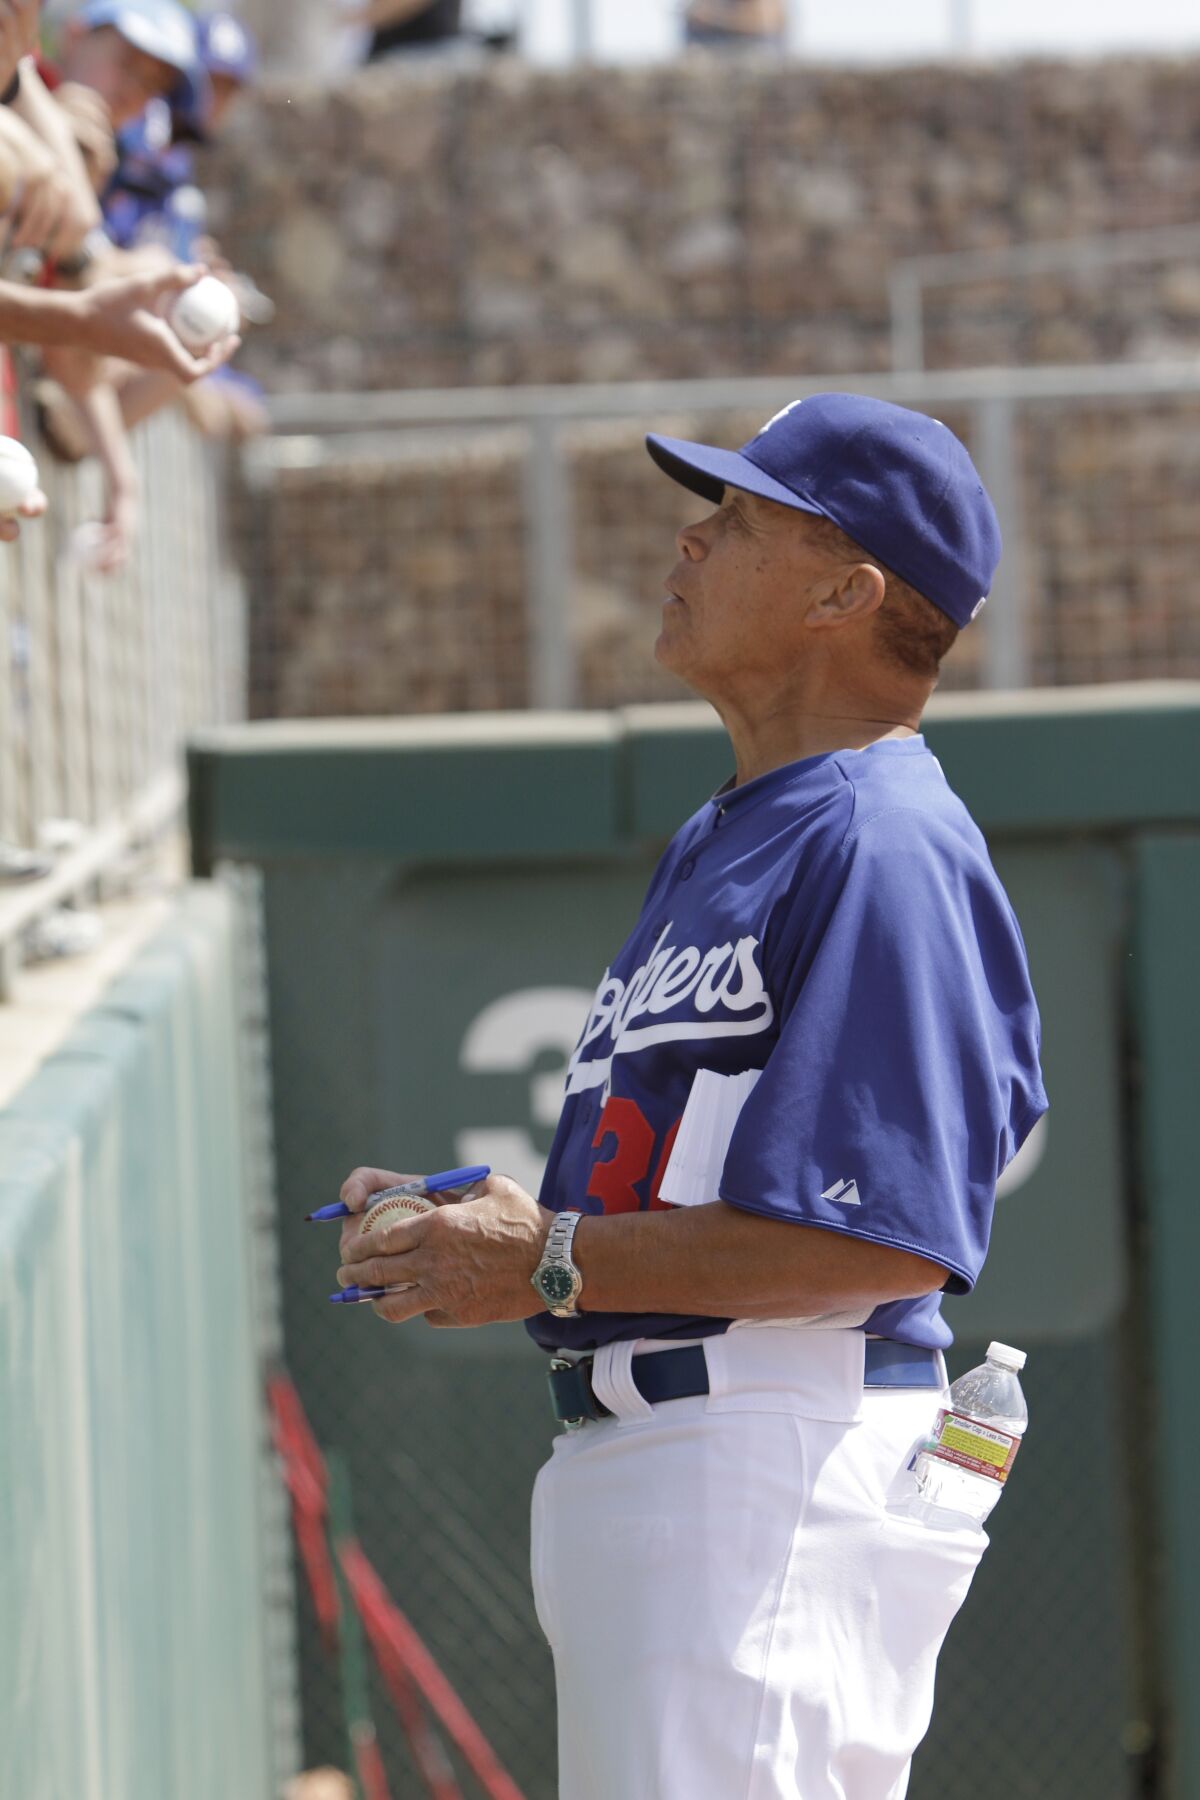 Maury Wills signs autographs before a Dodgers spring training baseball game against the Milwaukee Brewers